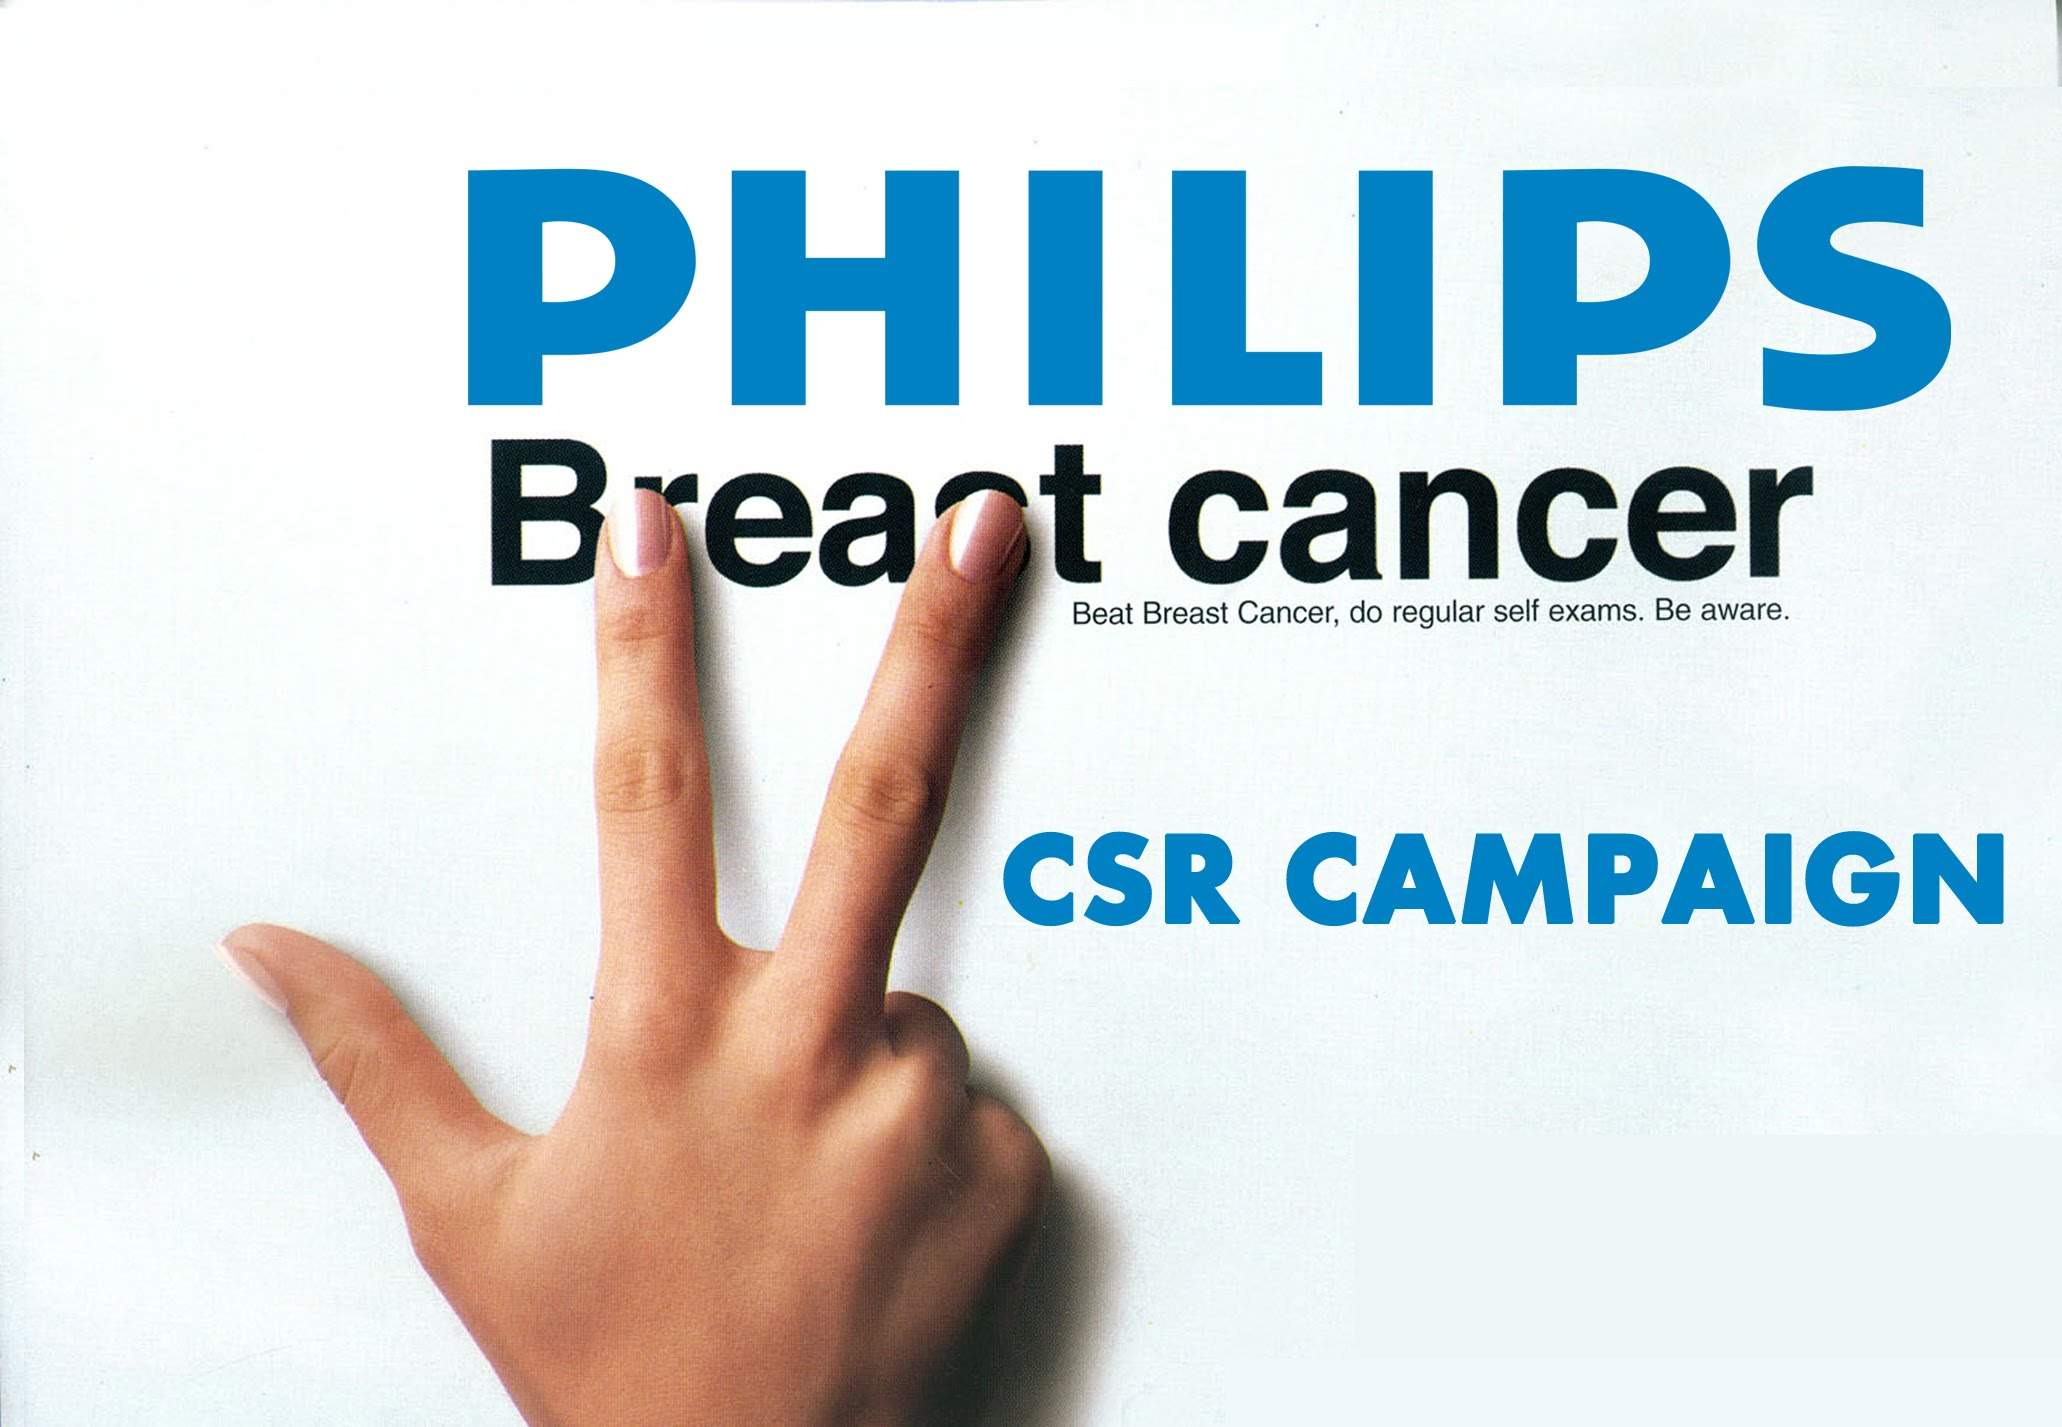 “Breaking the silence: #HimInitiative, For Her” by Philips.